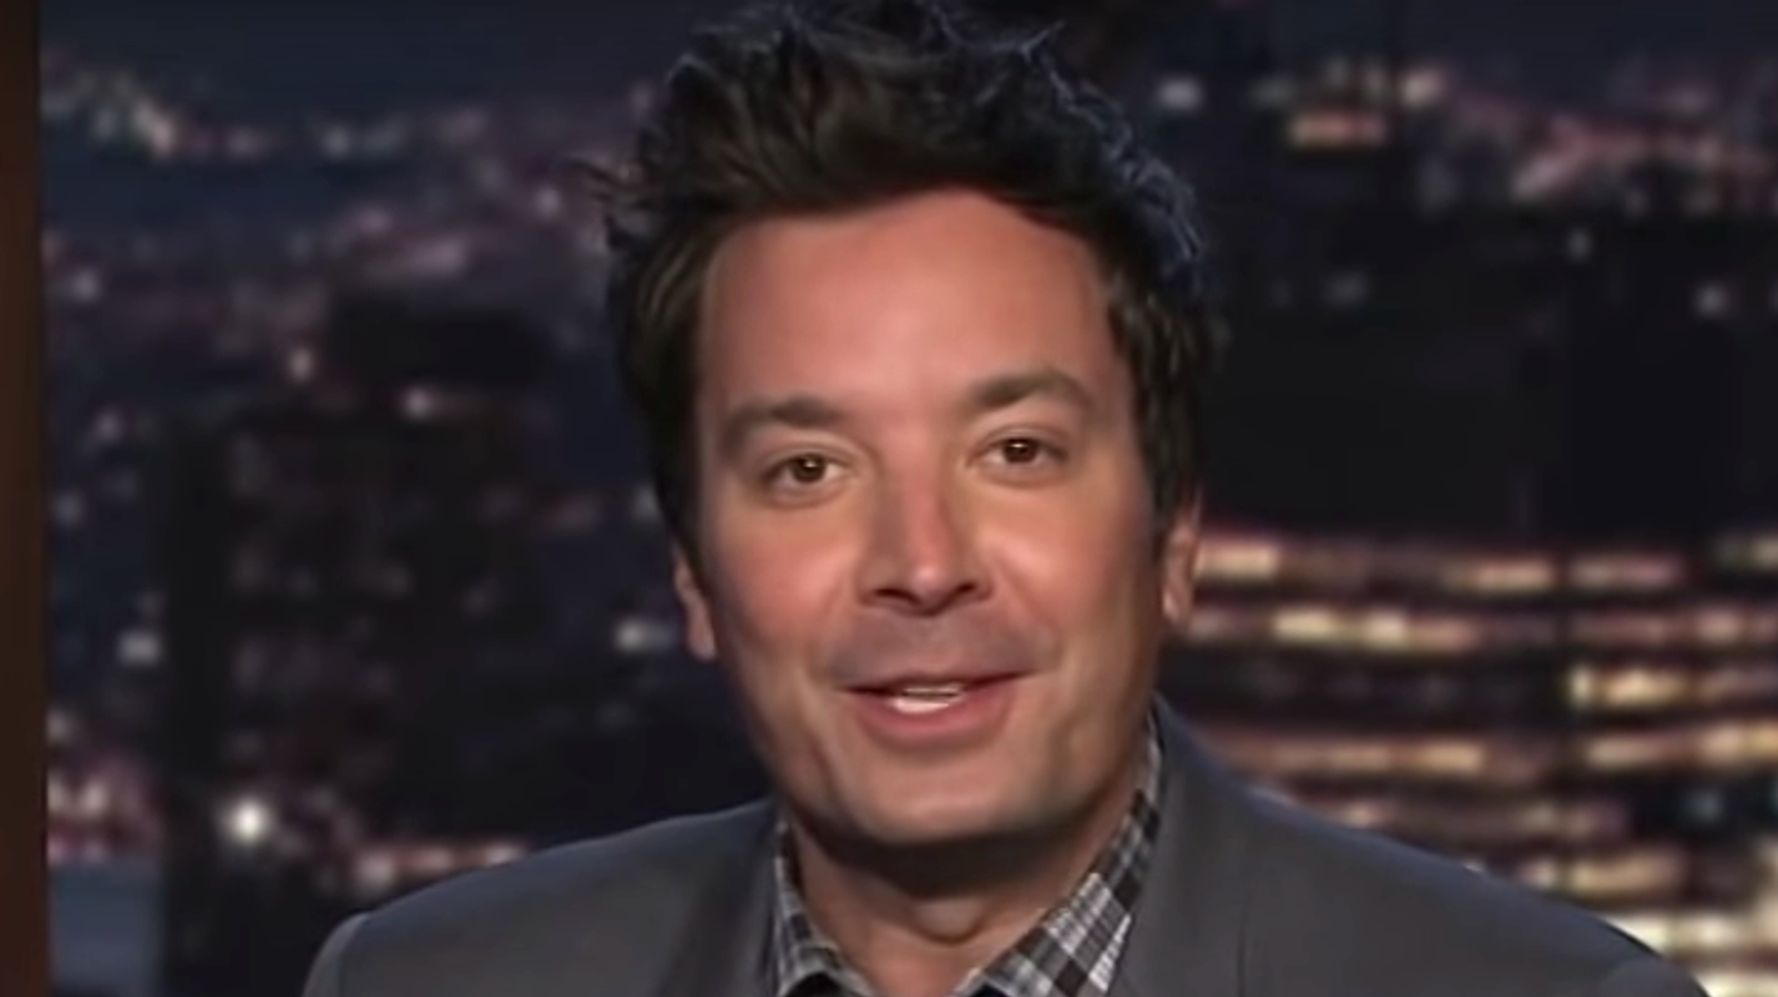 Jimmy Fallon Spots The Utterly Unsurprising Contradiction In Trump's Election Playbook